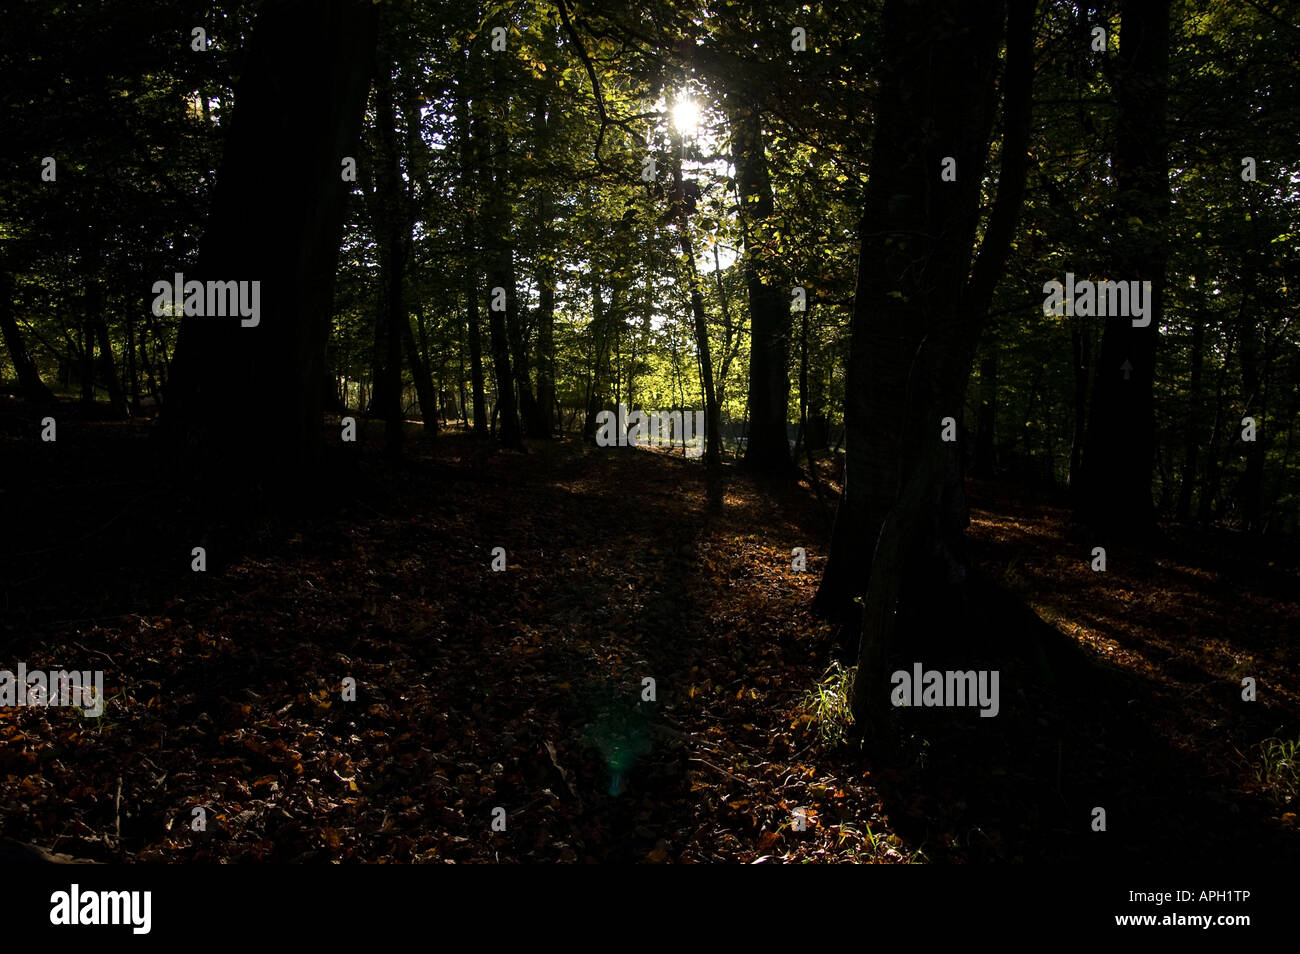 image looking up at trees in a forest on a sunny day with braches and leaves Stock Photo